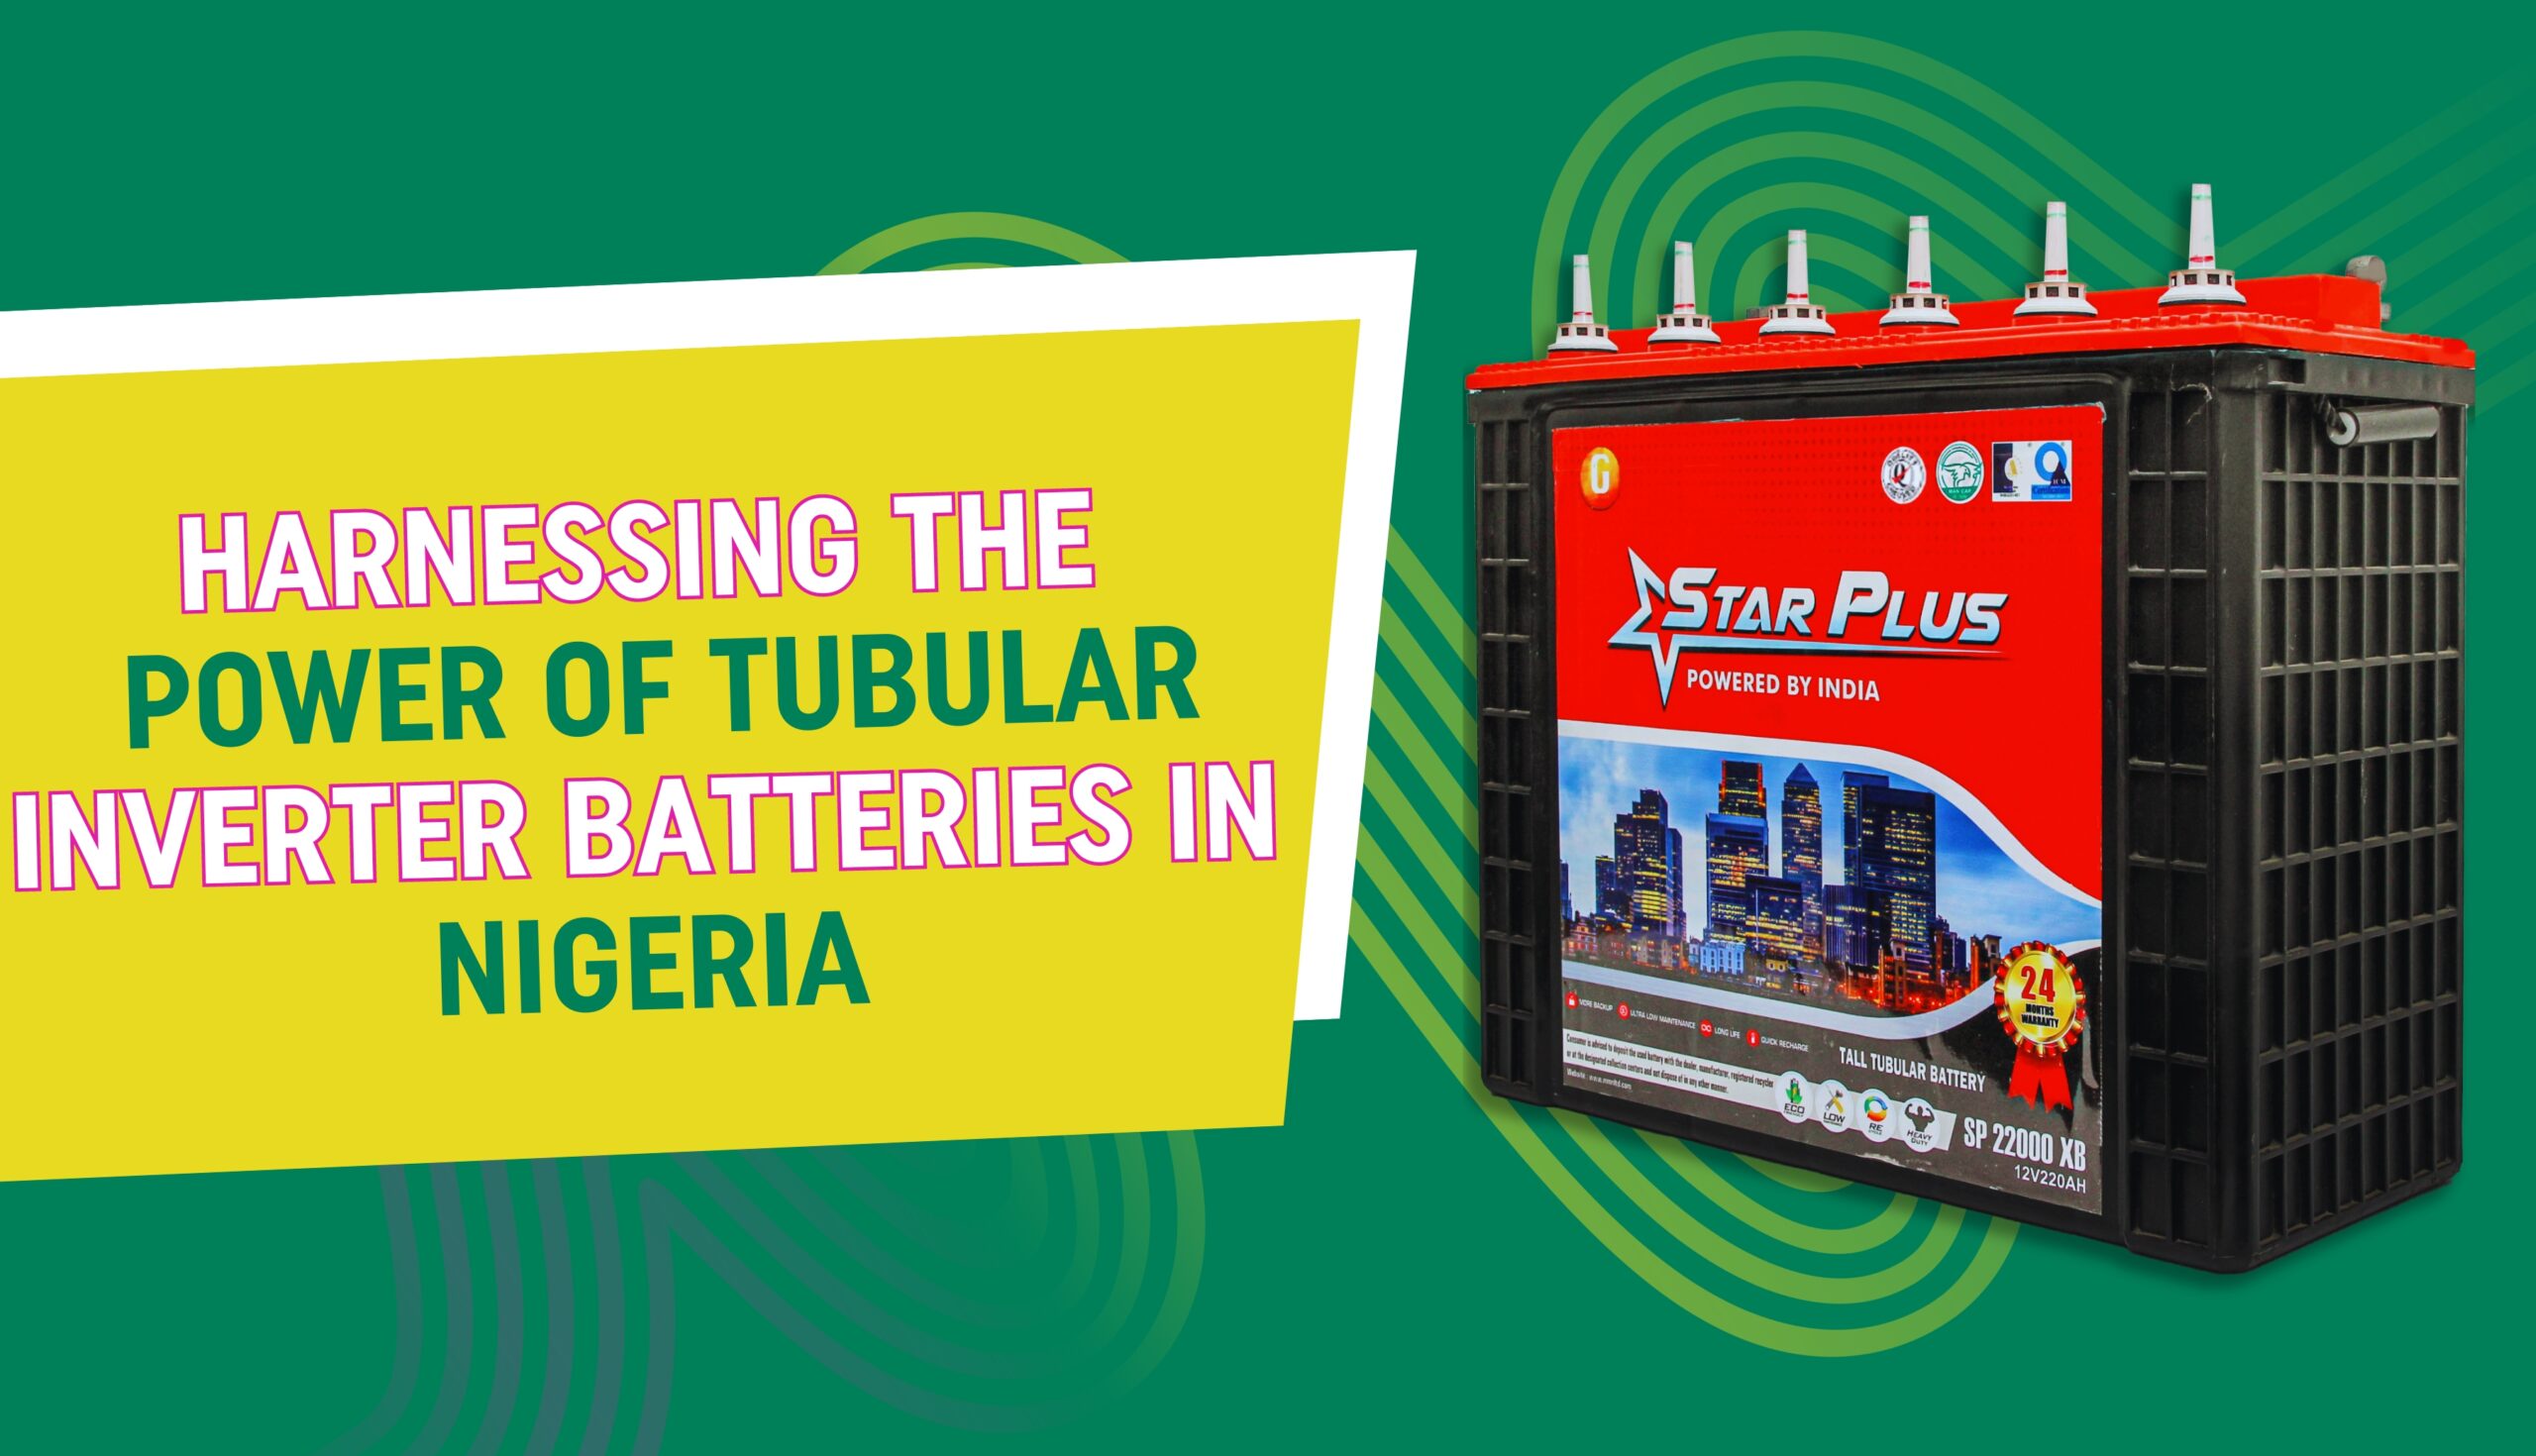 Harnessing the Power of Tubular Inverter Batteries in Nigeria